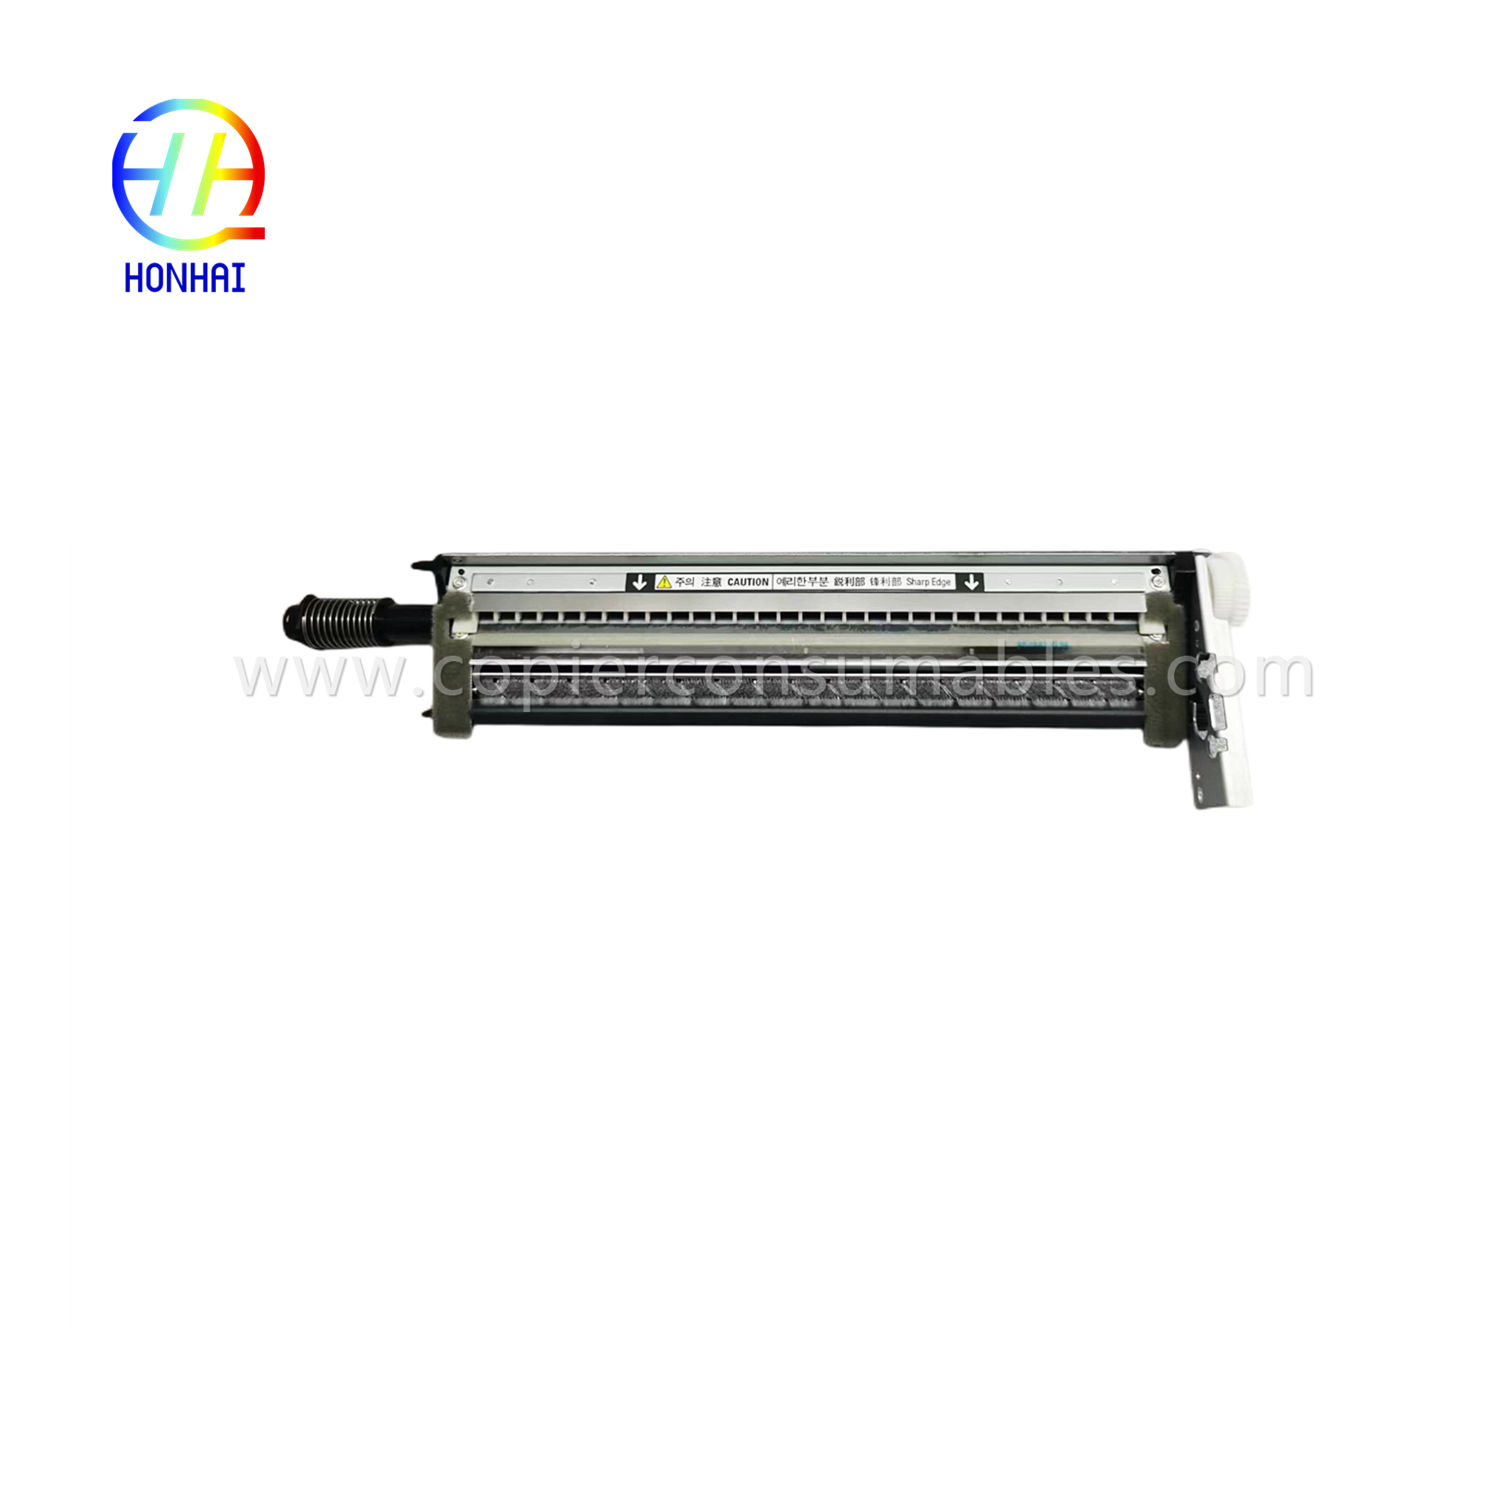 Ibt Belt Cleaner Assembly ye Xerox 700 700I 770DCP Ruvara 550 560 570 C60 C70 C75 J75press (042K94561 042K94560 042K94152 042K94151 2K 4 4 2K 4 4 2K 4 4 2K 4 4 2K 4 4 4 4 4 4 4 4 4 4 4 4 4 4 4 4 4 4 4 4 4 4 4 4 4 4 4 4 4 4 4 4 4 4 4 4 4 4 4 4 4 4 4 4 4 4 2 04 4560).